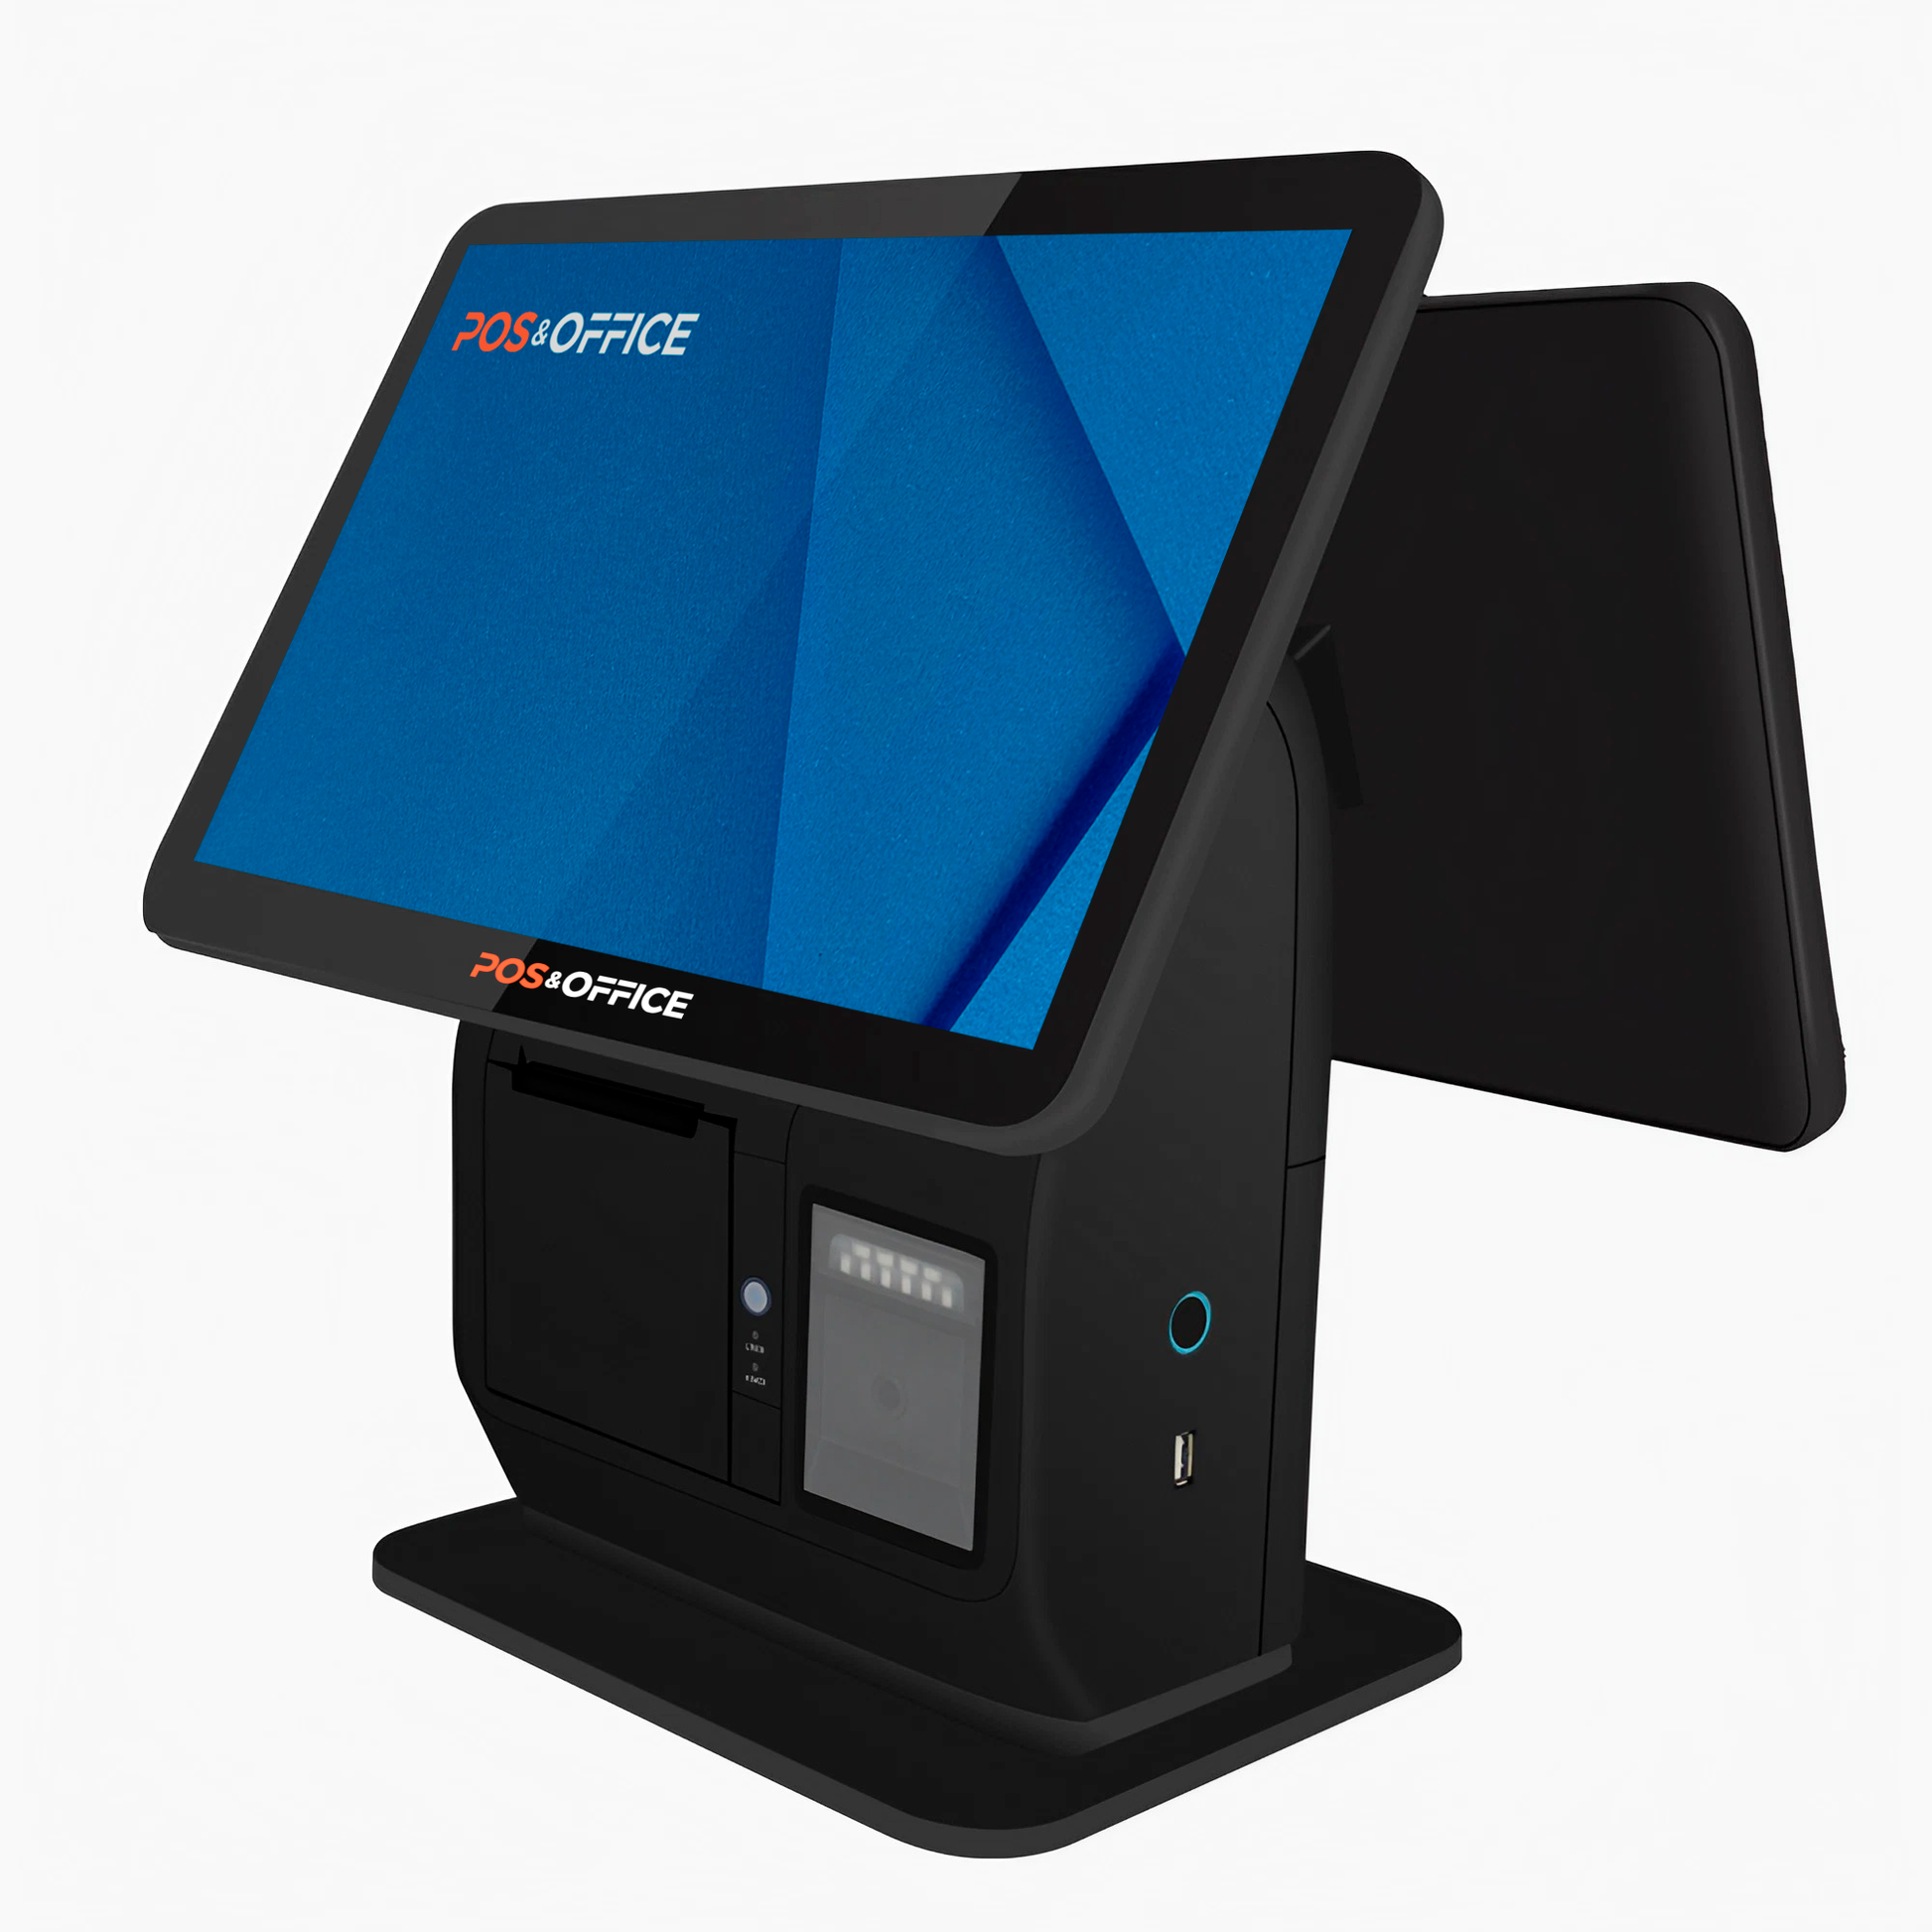 AI230, Android, Windows, all in one, all in one terminal, android POS, Windows POS, terminal de punto de venta, automação comercial, AIO, POS, PDV, all in one terminal, terminal de ponto de venda